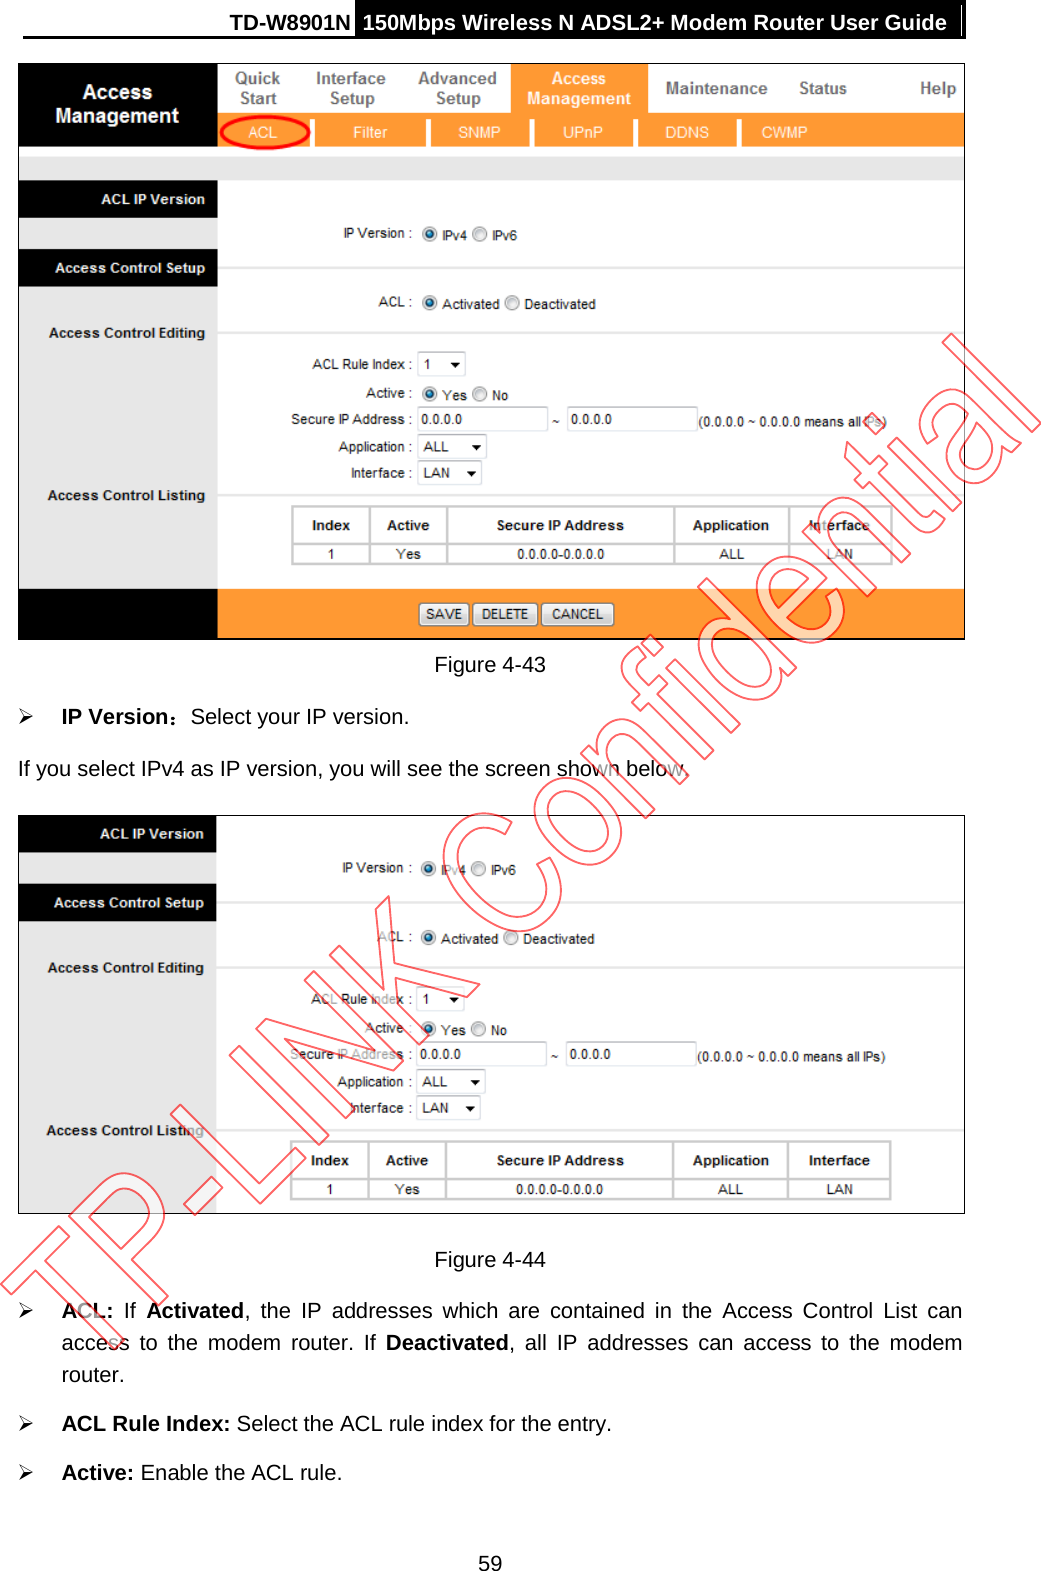 TD-W8901N 150Mbps Wireless N ADSL2+ Modem Router User Guide   Figure 4-43  IP Version：Select your IP version. If you select IPv4 as IP version, you will see the screen shown below.  Figure 4-44  ACL:  If  Activated, the IP addresses which are contained in the Access Control List can access  to  the  modem router. If Deactivated,  all  IP addresses can access to the  modem router.  ACL Rule Index: Select the ACL rule index for the entry.    Active: Enable the ACL rule. 59 